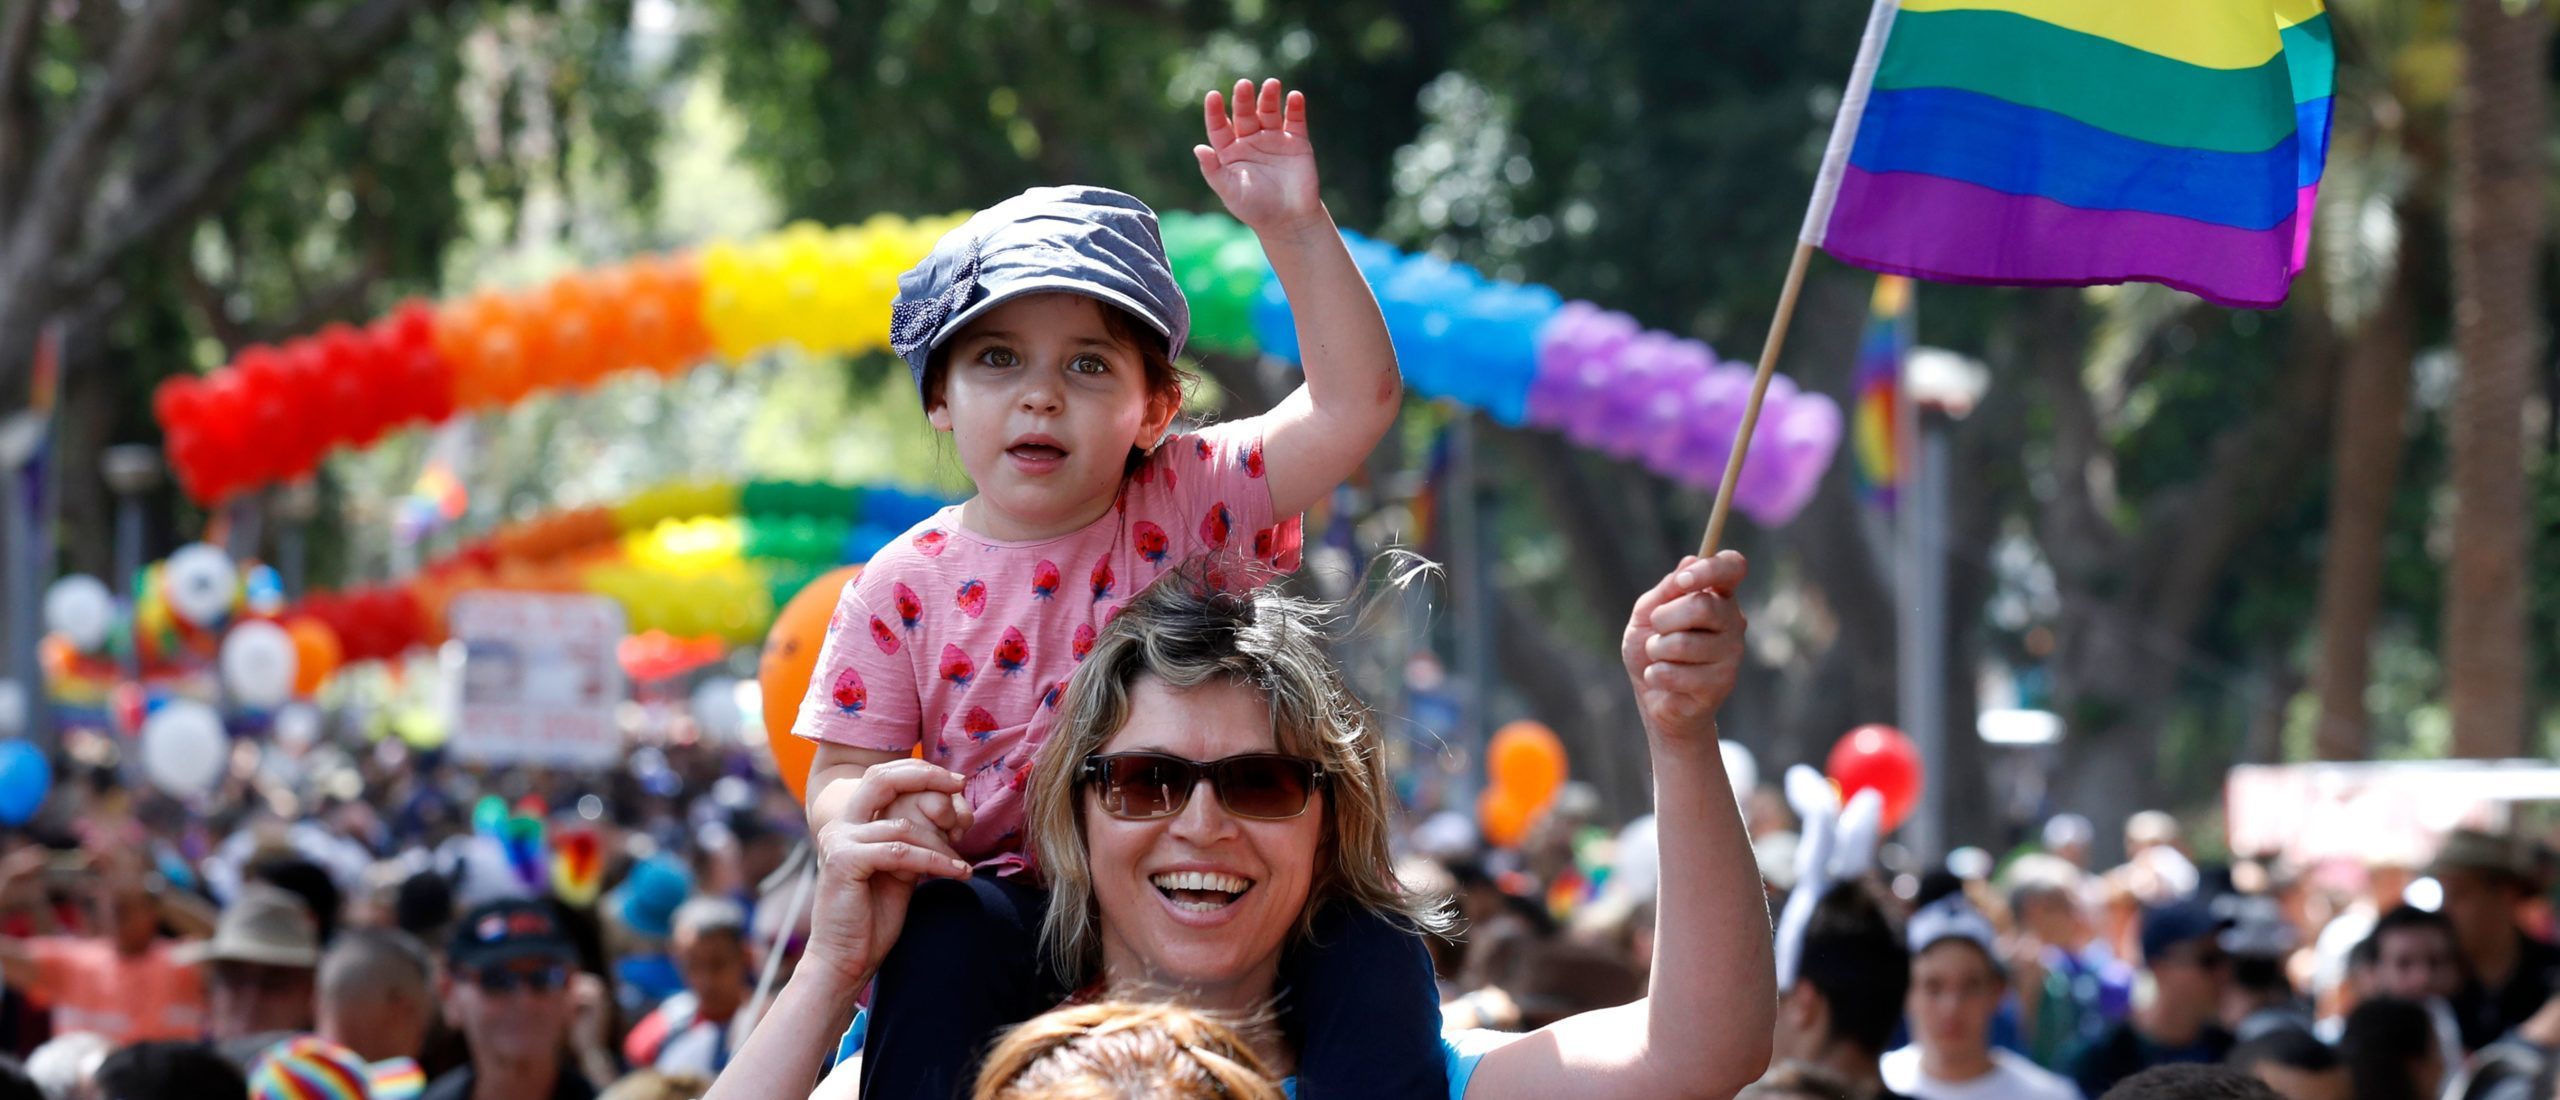 A woman carrying a child on her shoulder waves a rainbow flag during the opening event of the annual Gay Pride parade in the Israeli city of Tel Aviv, on June 3, 2016. (Photo by JACK GUEZ / AFP)